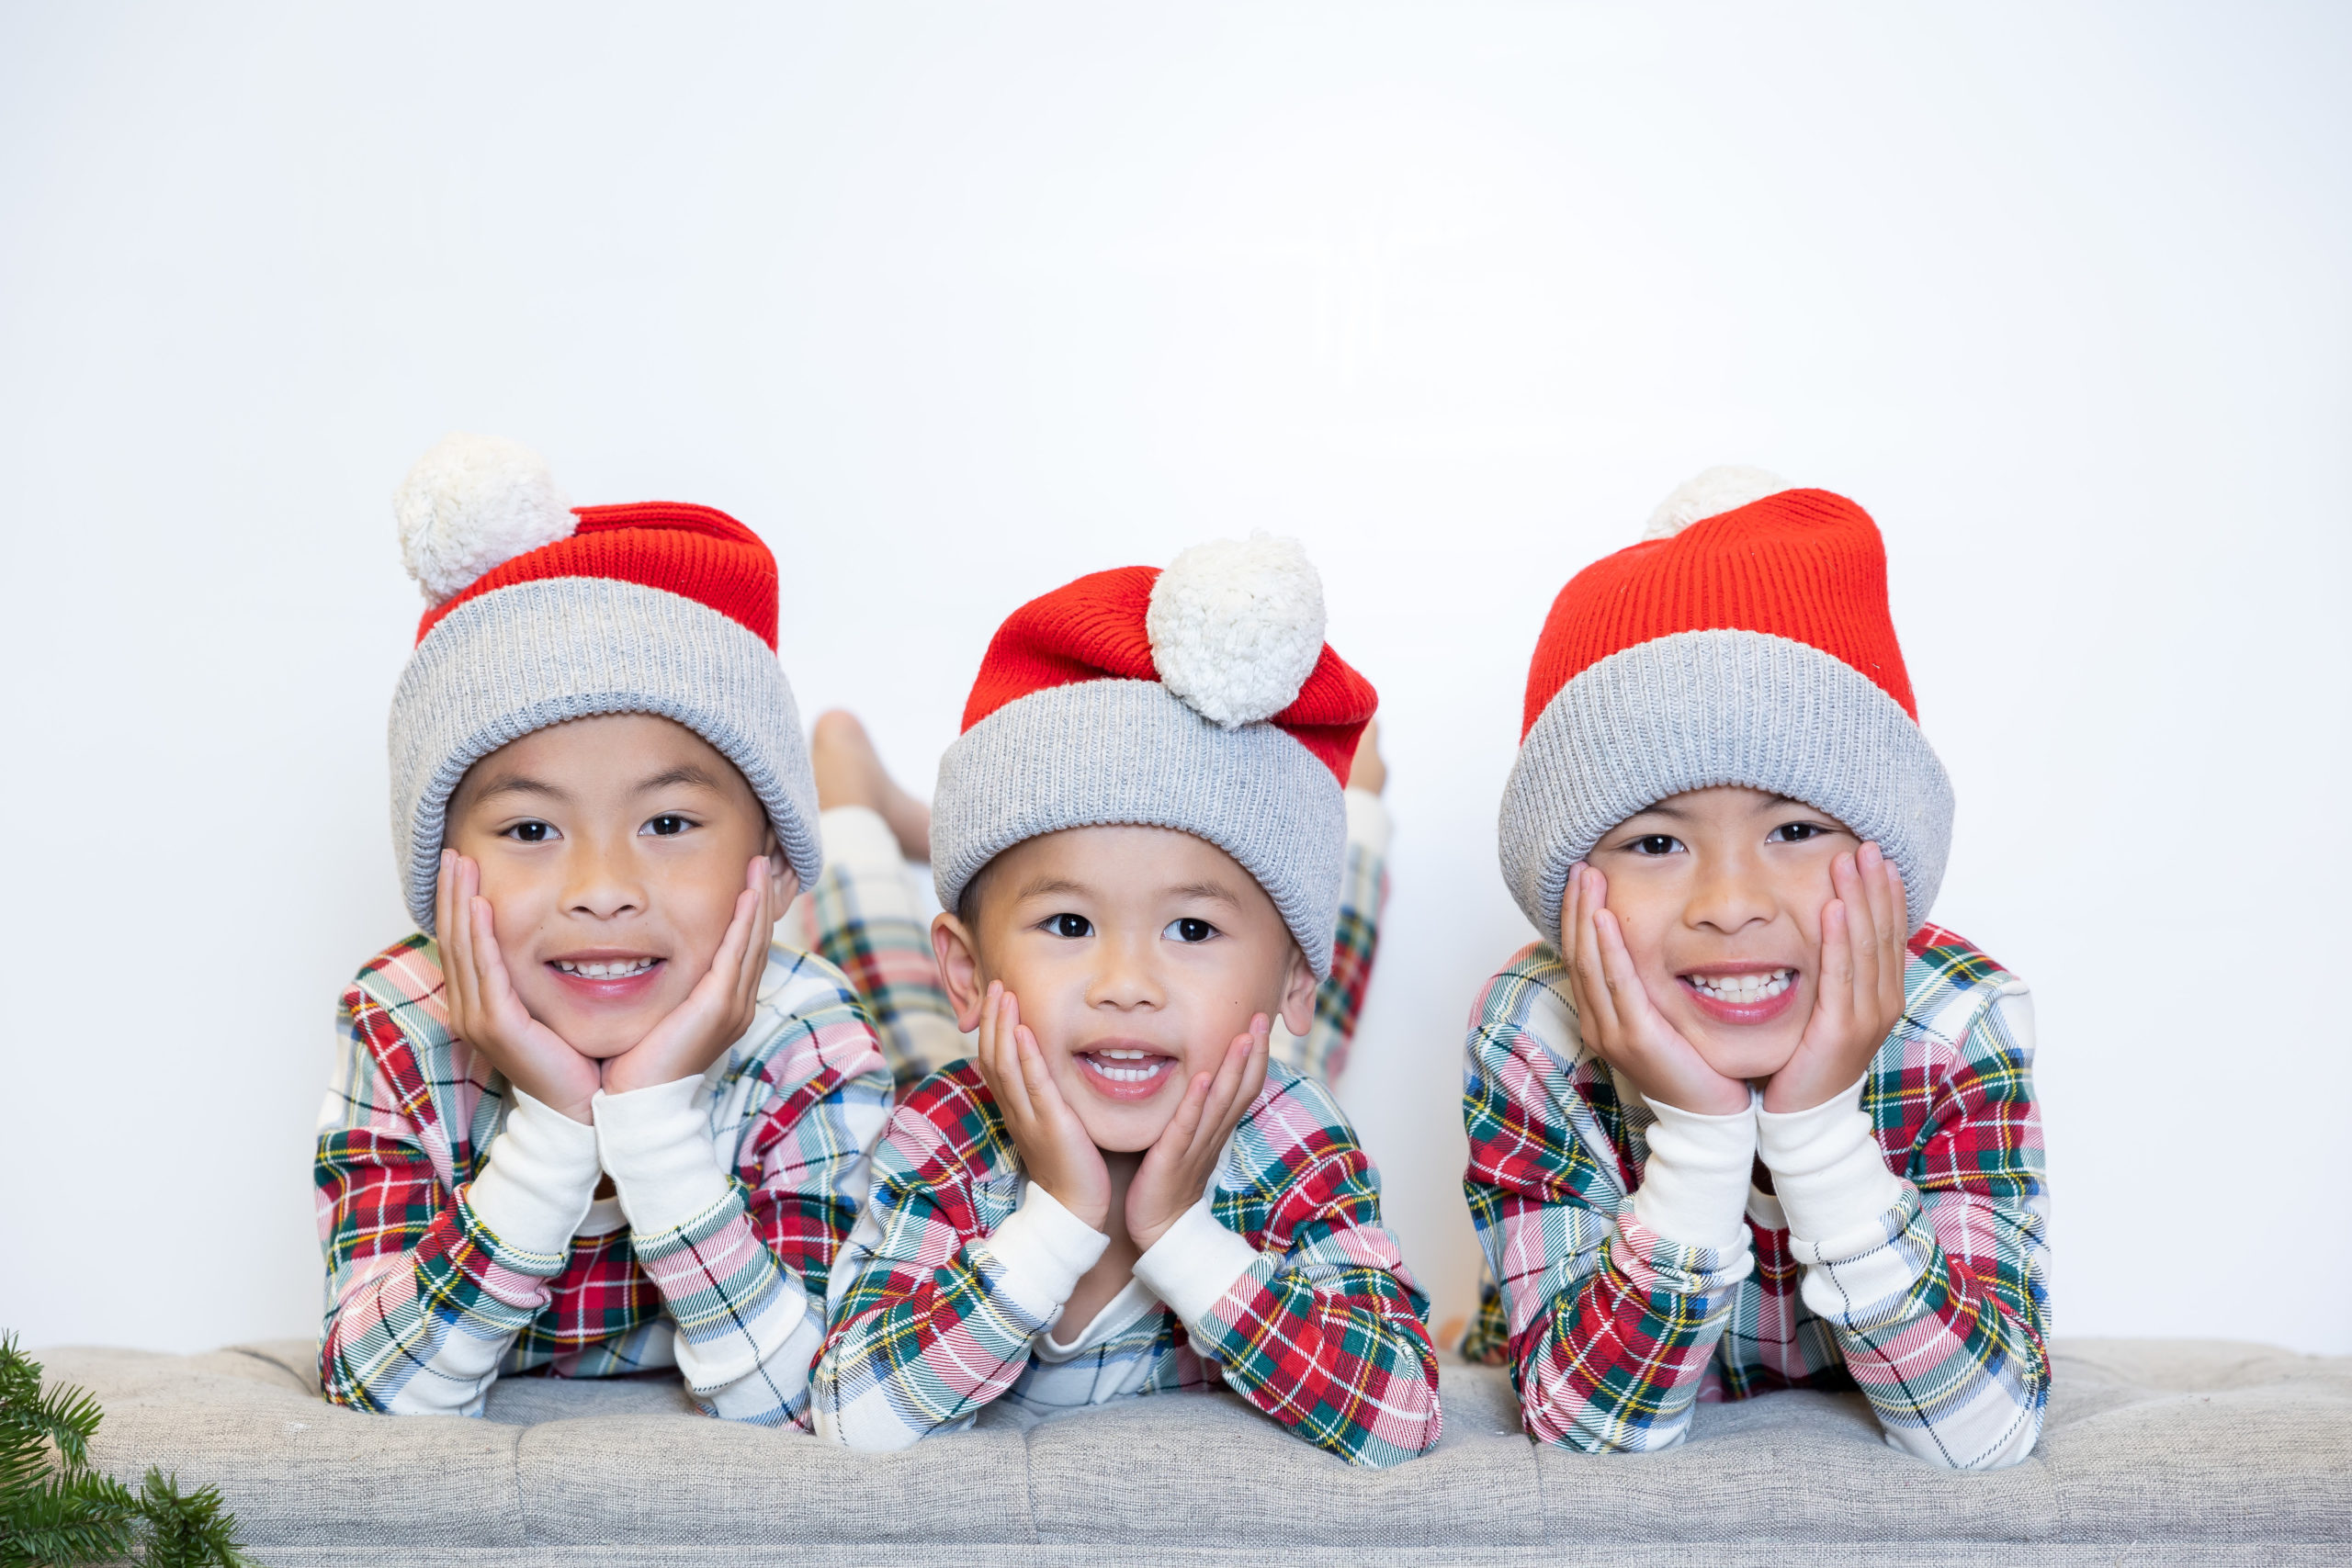 Christmas mini session - brothers in santa hats - photo by Paper Bunny Studios, Edmonton